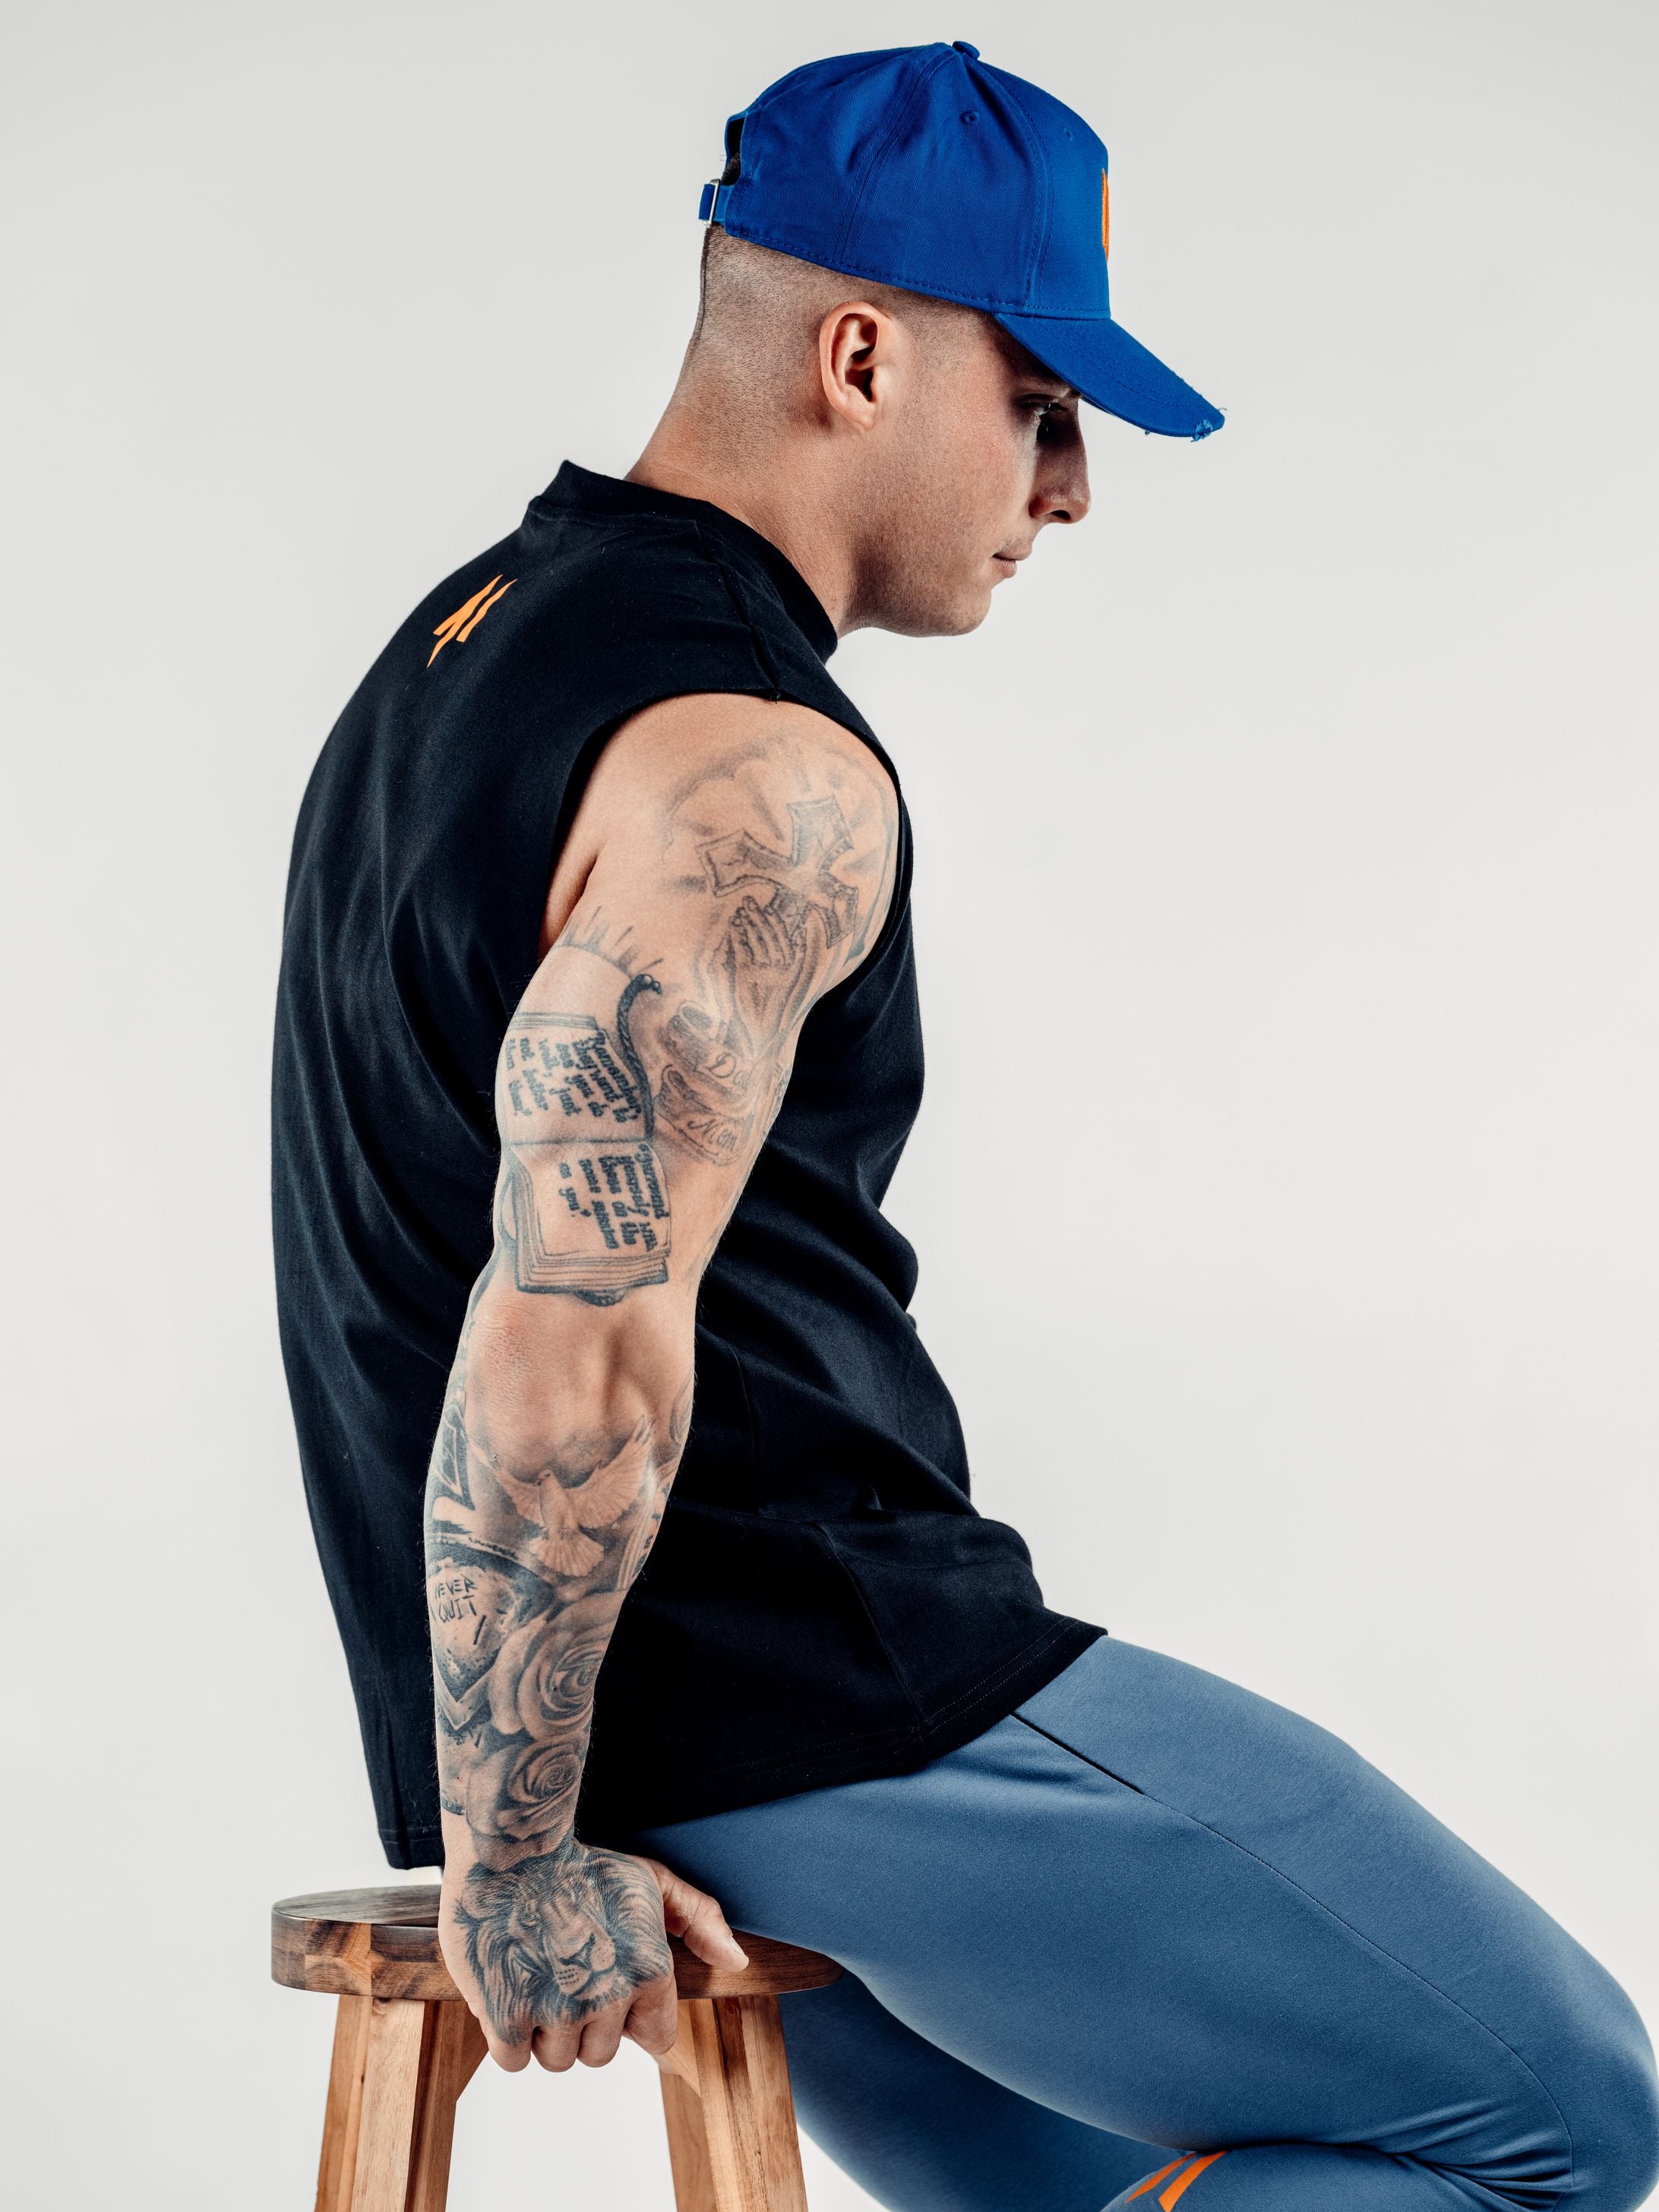 This is a rear sideview of Lewis wearing the new standard 3d distressed 5 panel in electric blue. It shows off the strap, buckle and how the peak fits from a side profile. Lewis is also wearing the new standard vest in black featuring the M emblem at the top of his back.